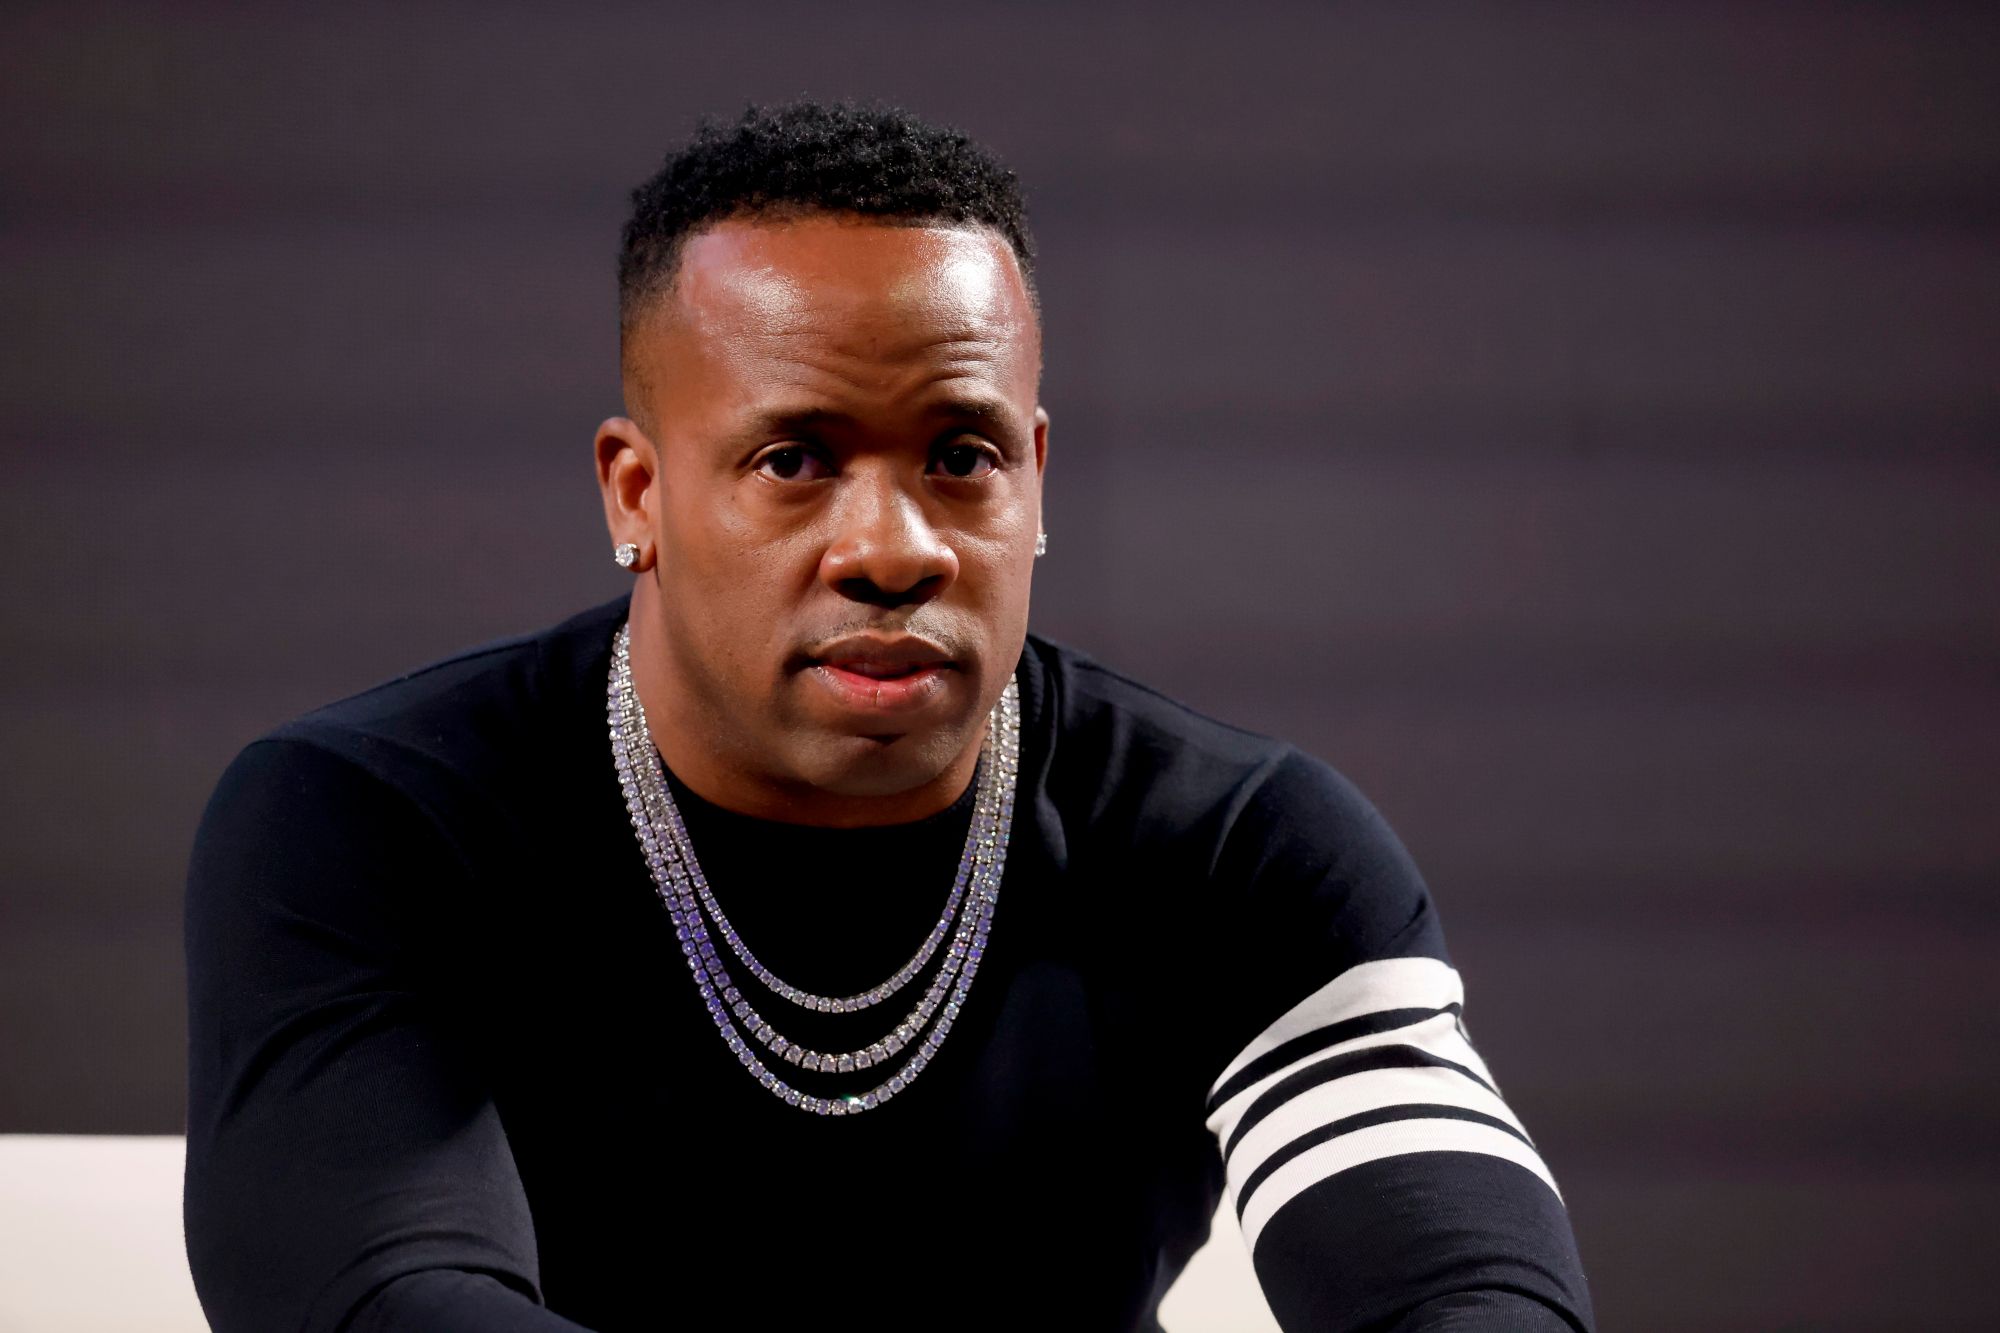 Yo Gotti Makes Surprise Appearance At 42 Dugg’s Concert After Brother’s Tragic Death